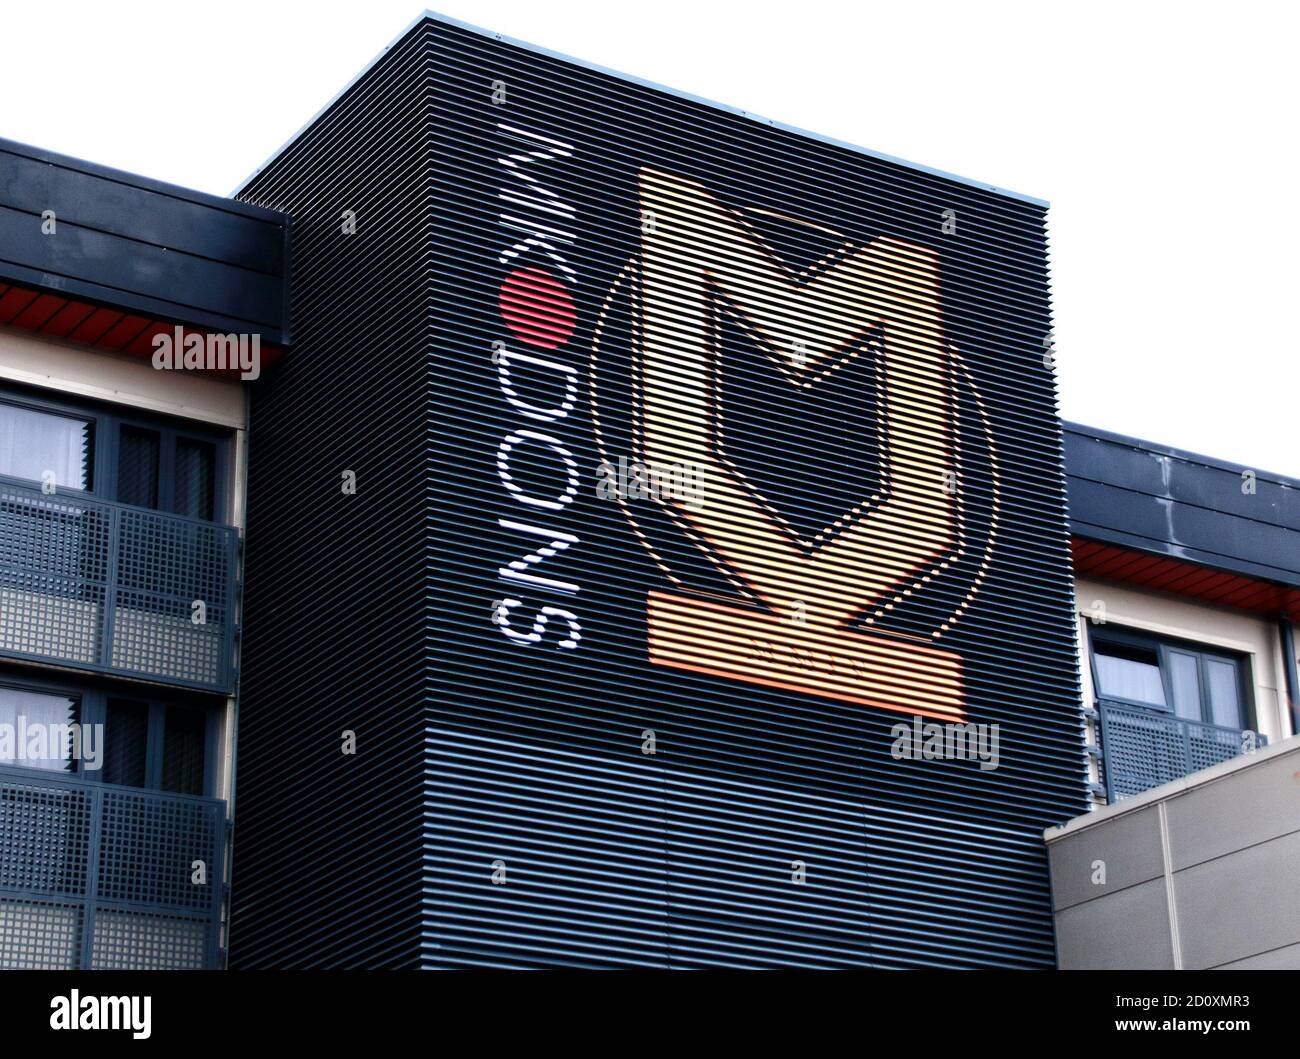 Milton Keynes, UK. 03rd Oct, 2020. MK Dons logo seen above the entrance to the stadium.EFL Sky Bet League One club MK Dons continues to play matches behind closed doors during the Covid-19 restrictions. The club's Marshall Arena is empty on a day they are playing league leaders Ipswich Town and would likely have had a full house. Many clubs outside the English Premier League fear for their future without any financial help with no revenue coming in on match days. Result of the game - MK Dons drew with Ipswich Town 1-1 in the EFL Sky Bet League One. Credit: SOPA Images Limited/Alamy Live News Stock Photo